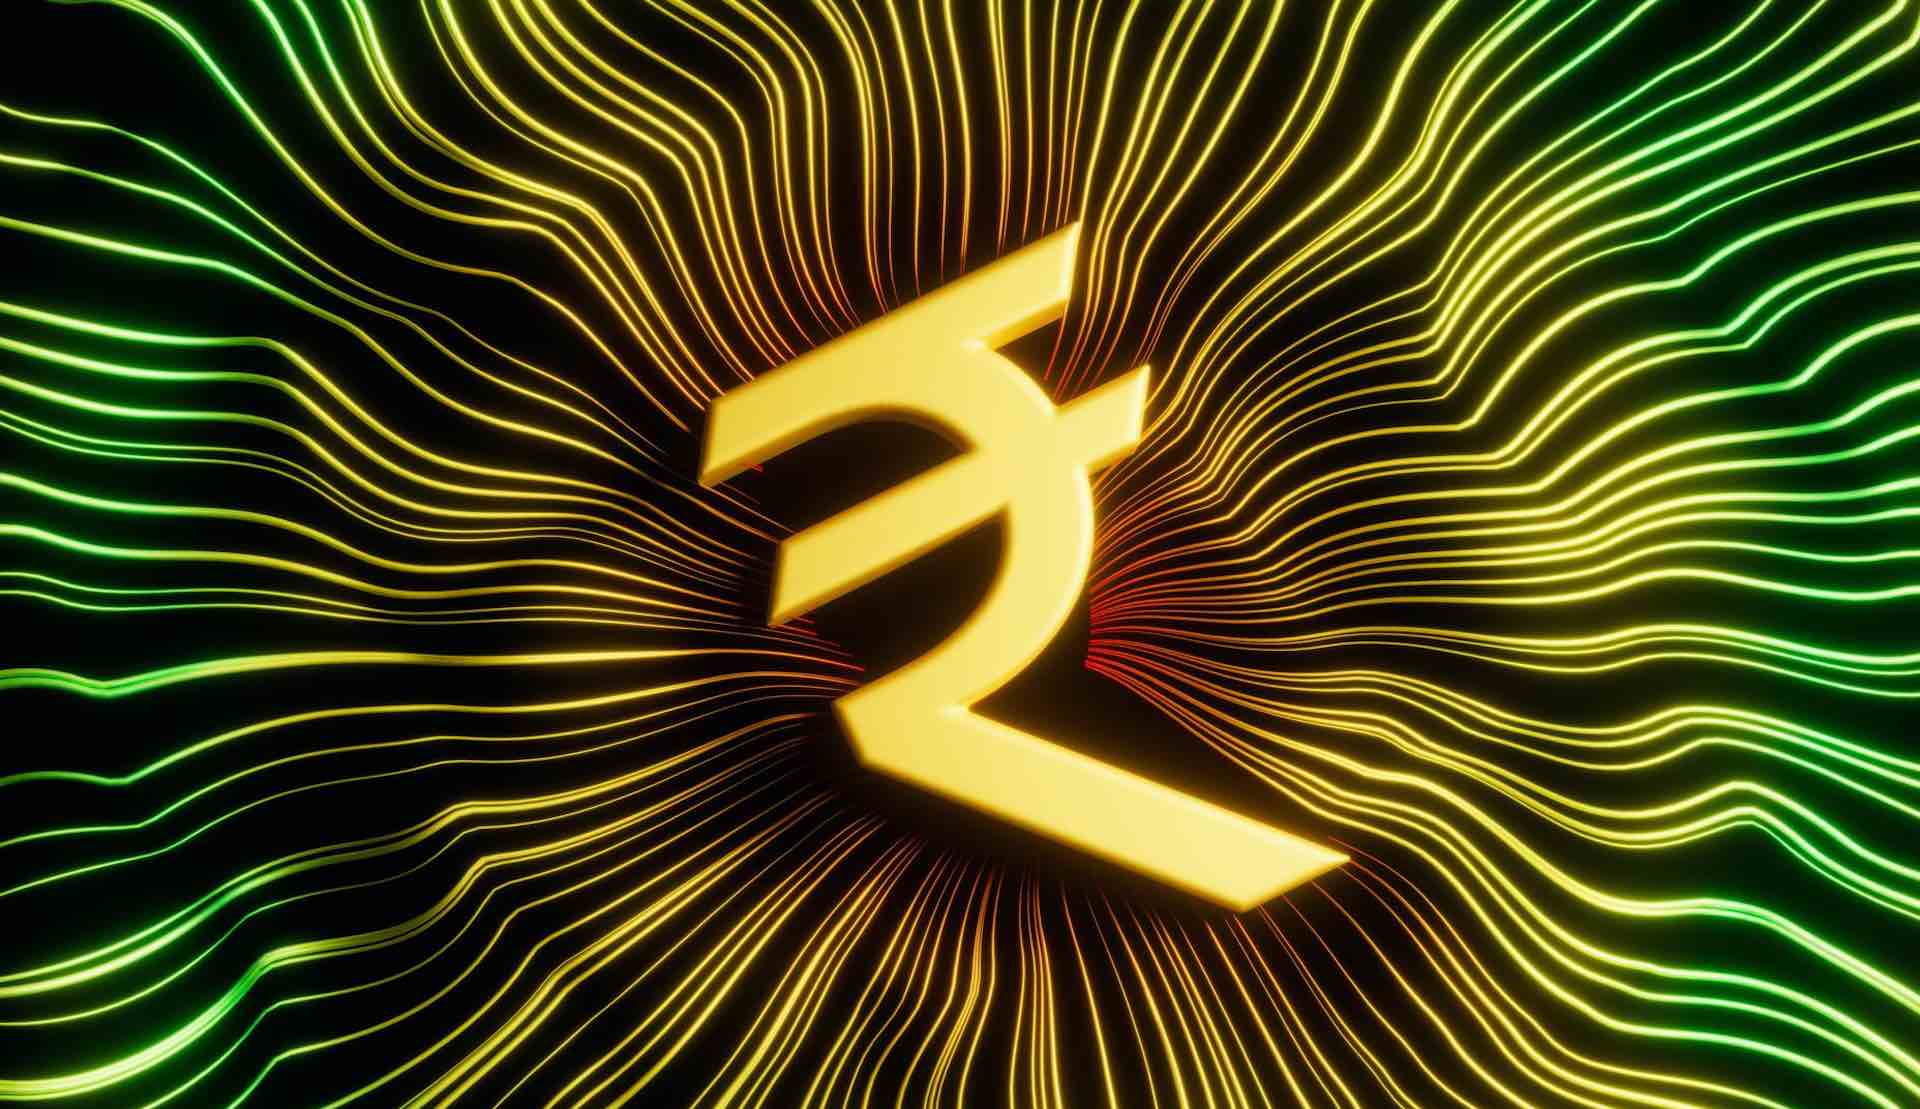 Reserve Bank of India to launch retail digital rupee pilot program on December 1